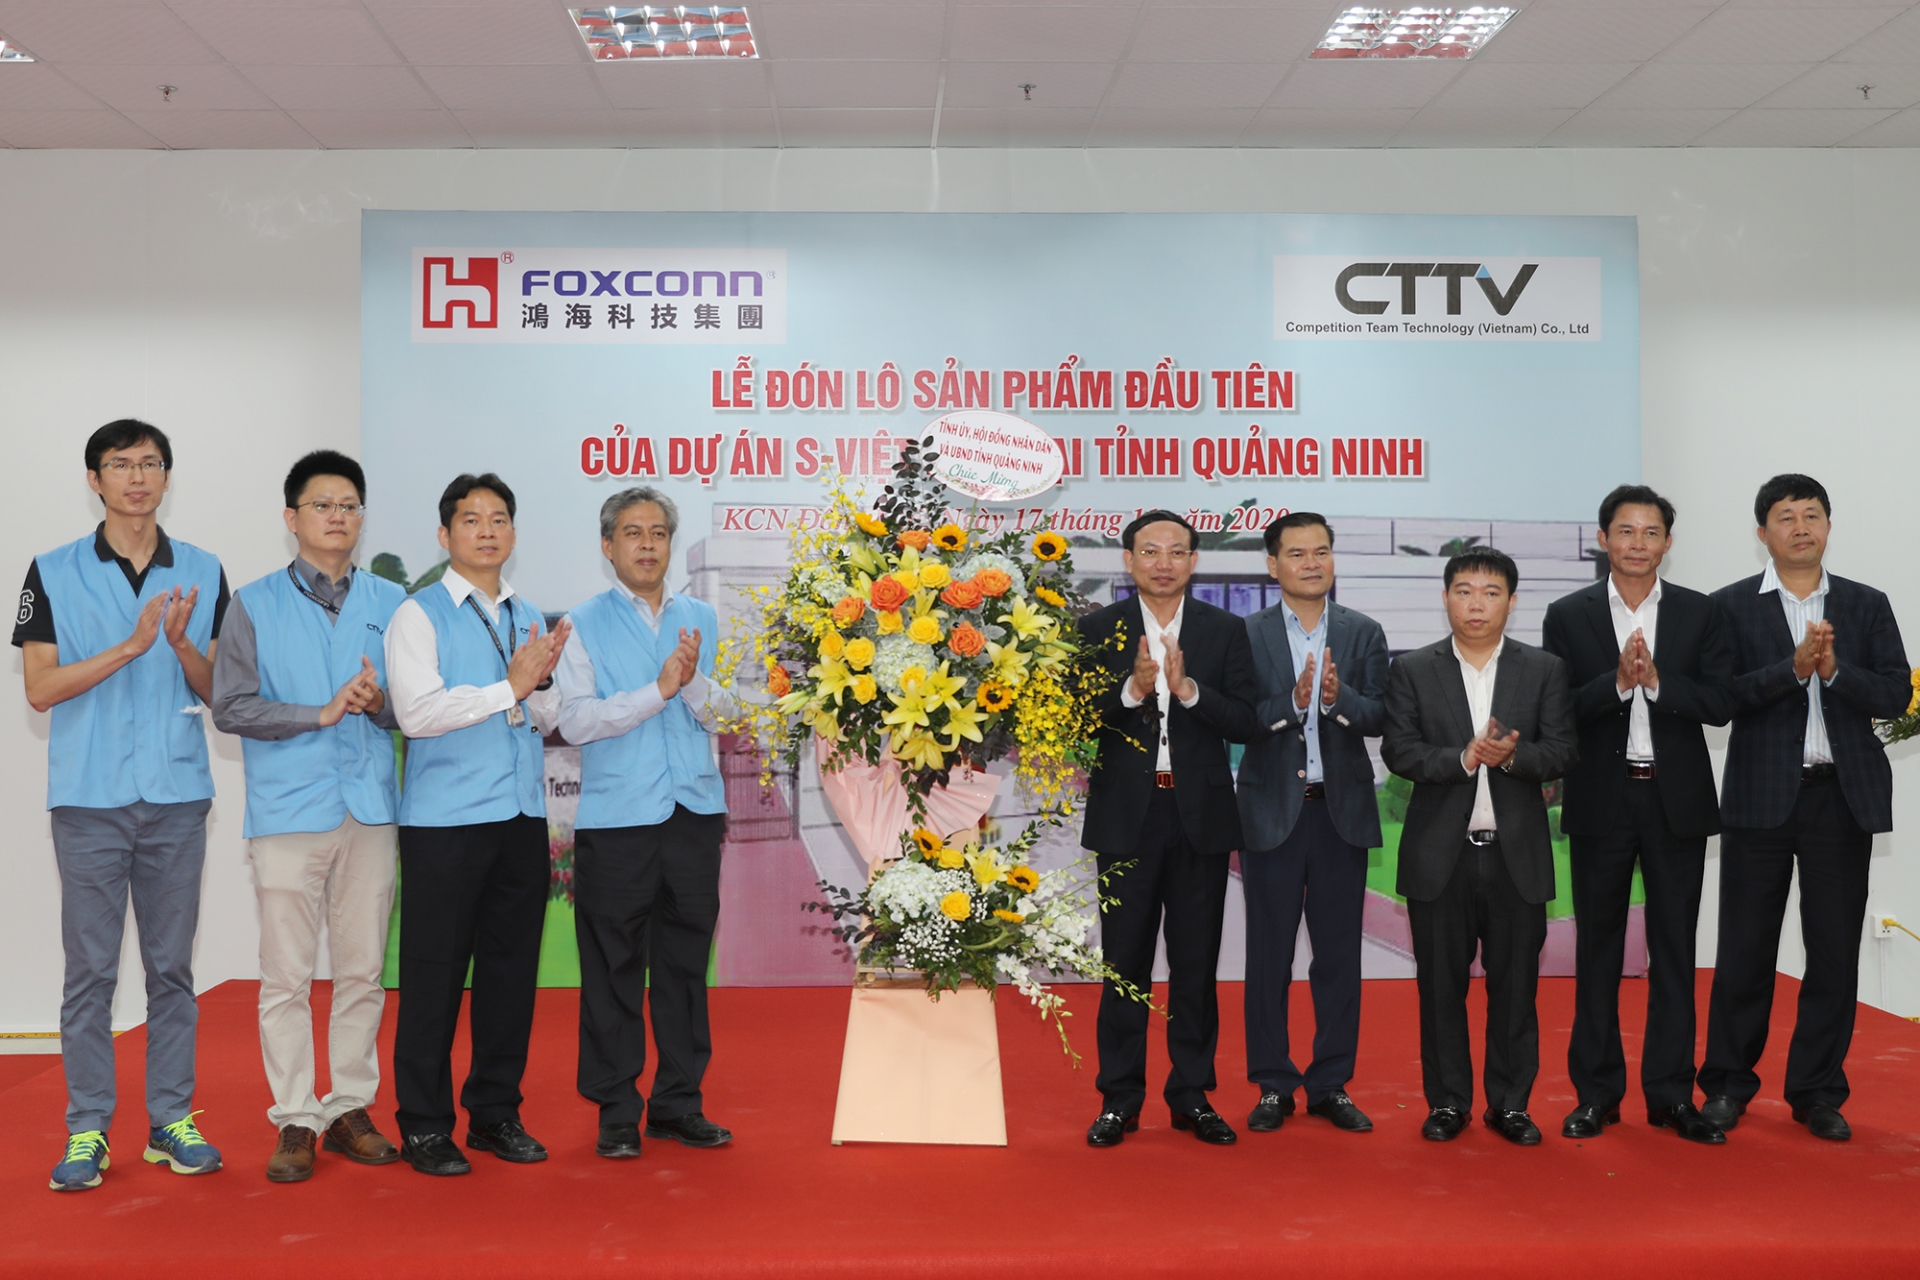 taiwan based maker foxconn starts display manufacturing factory in vietnam